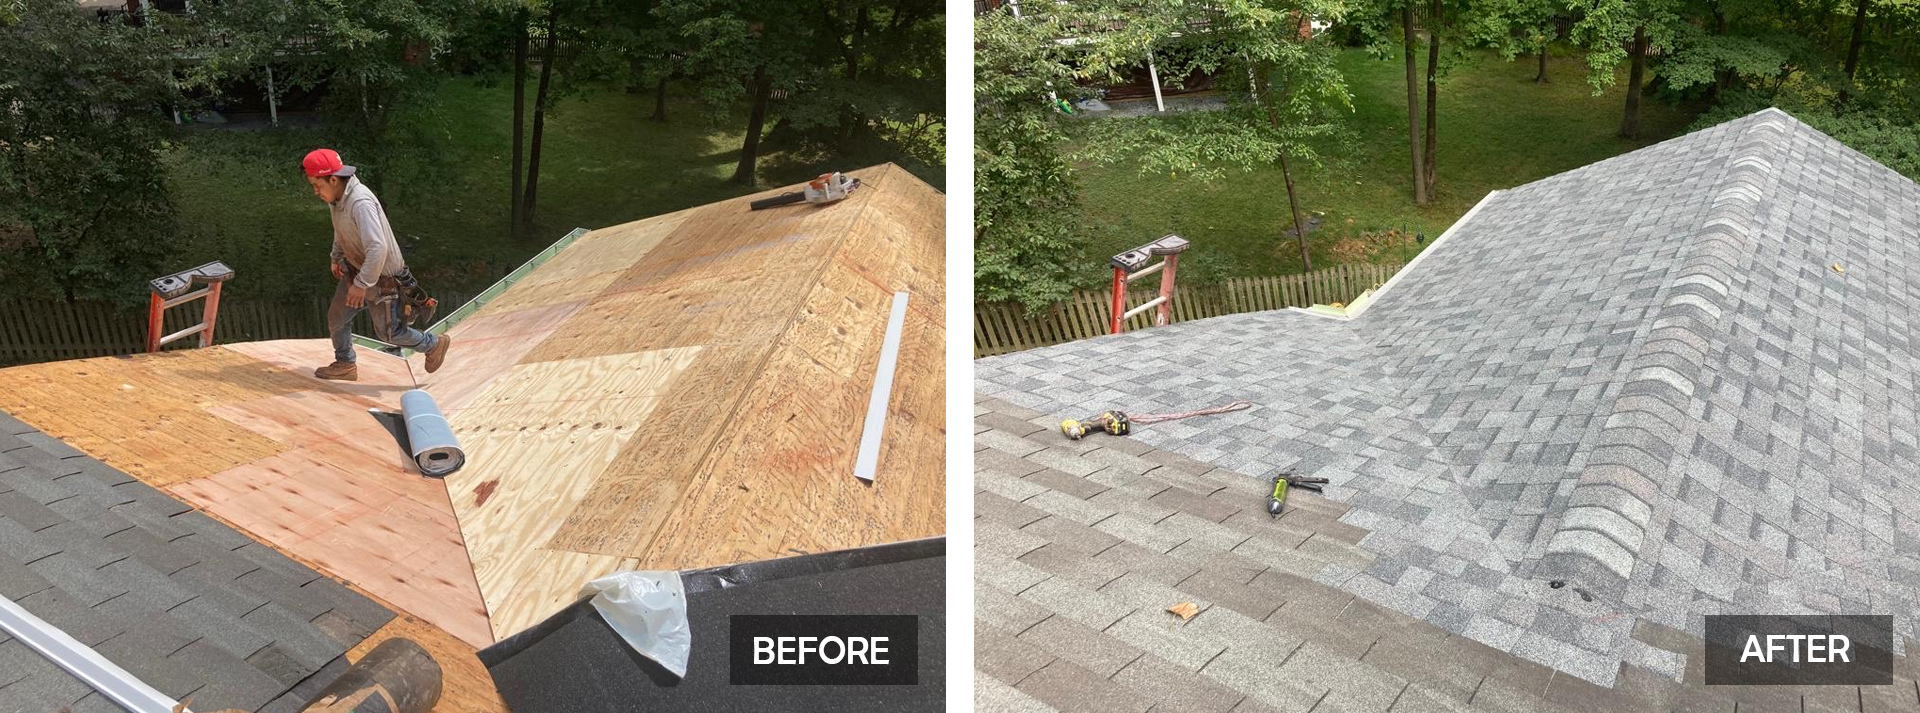 Roofing (Before / After)